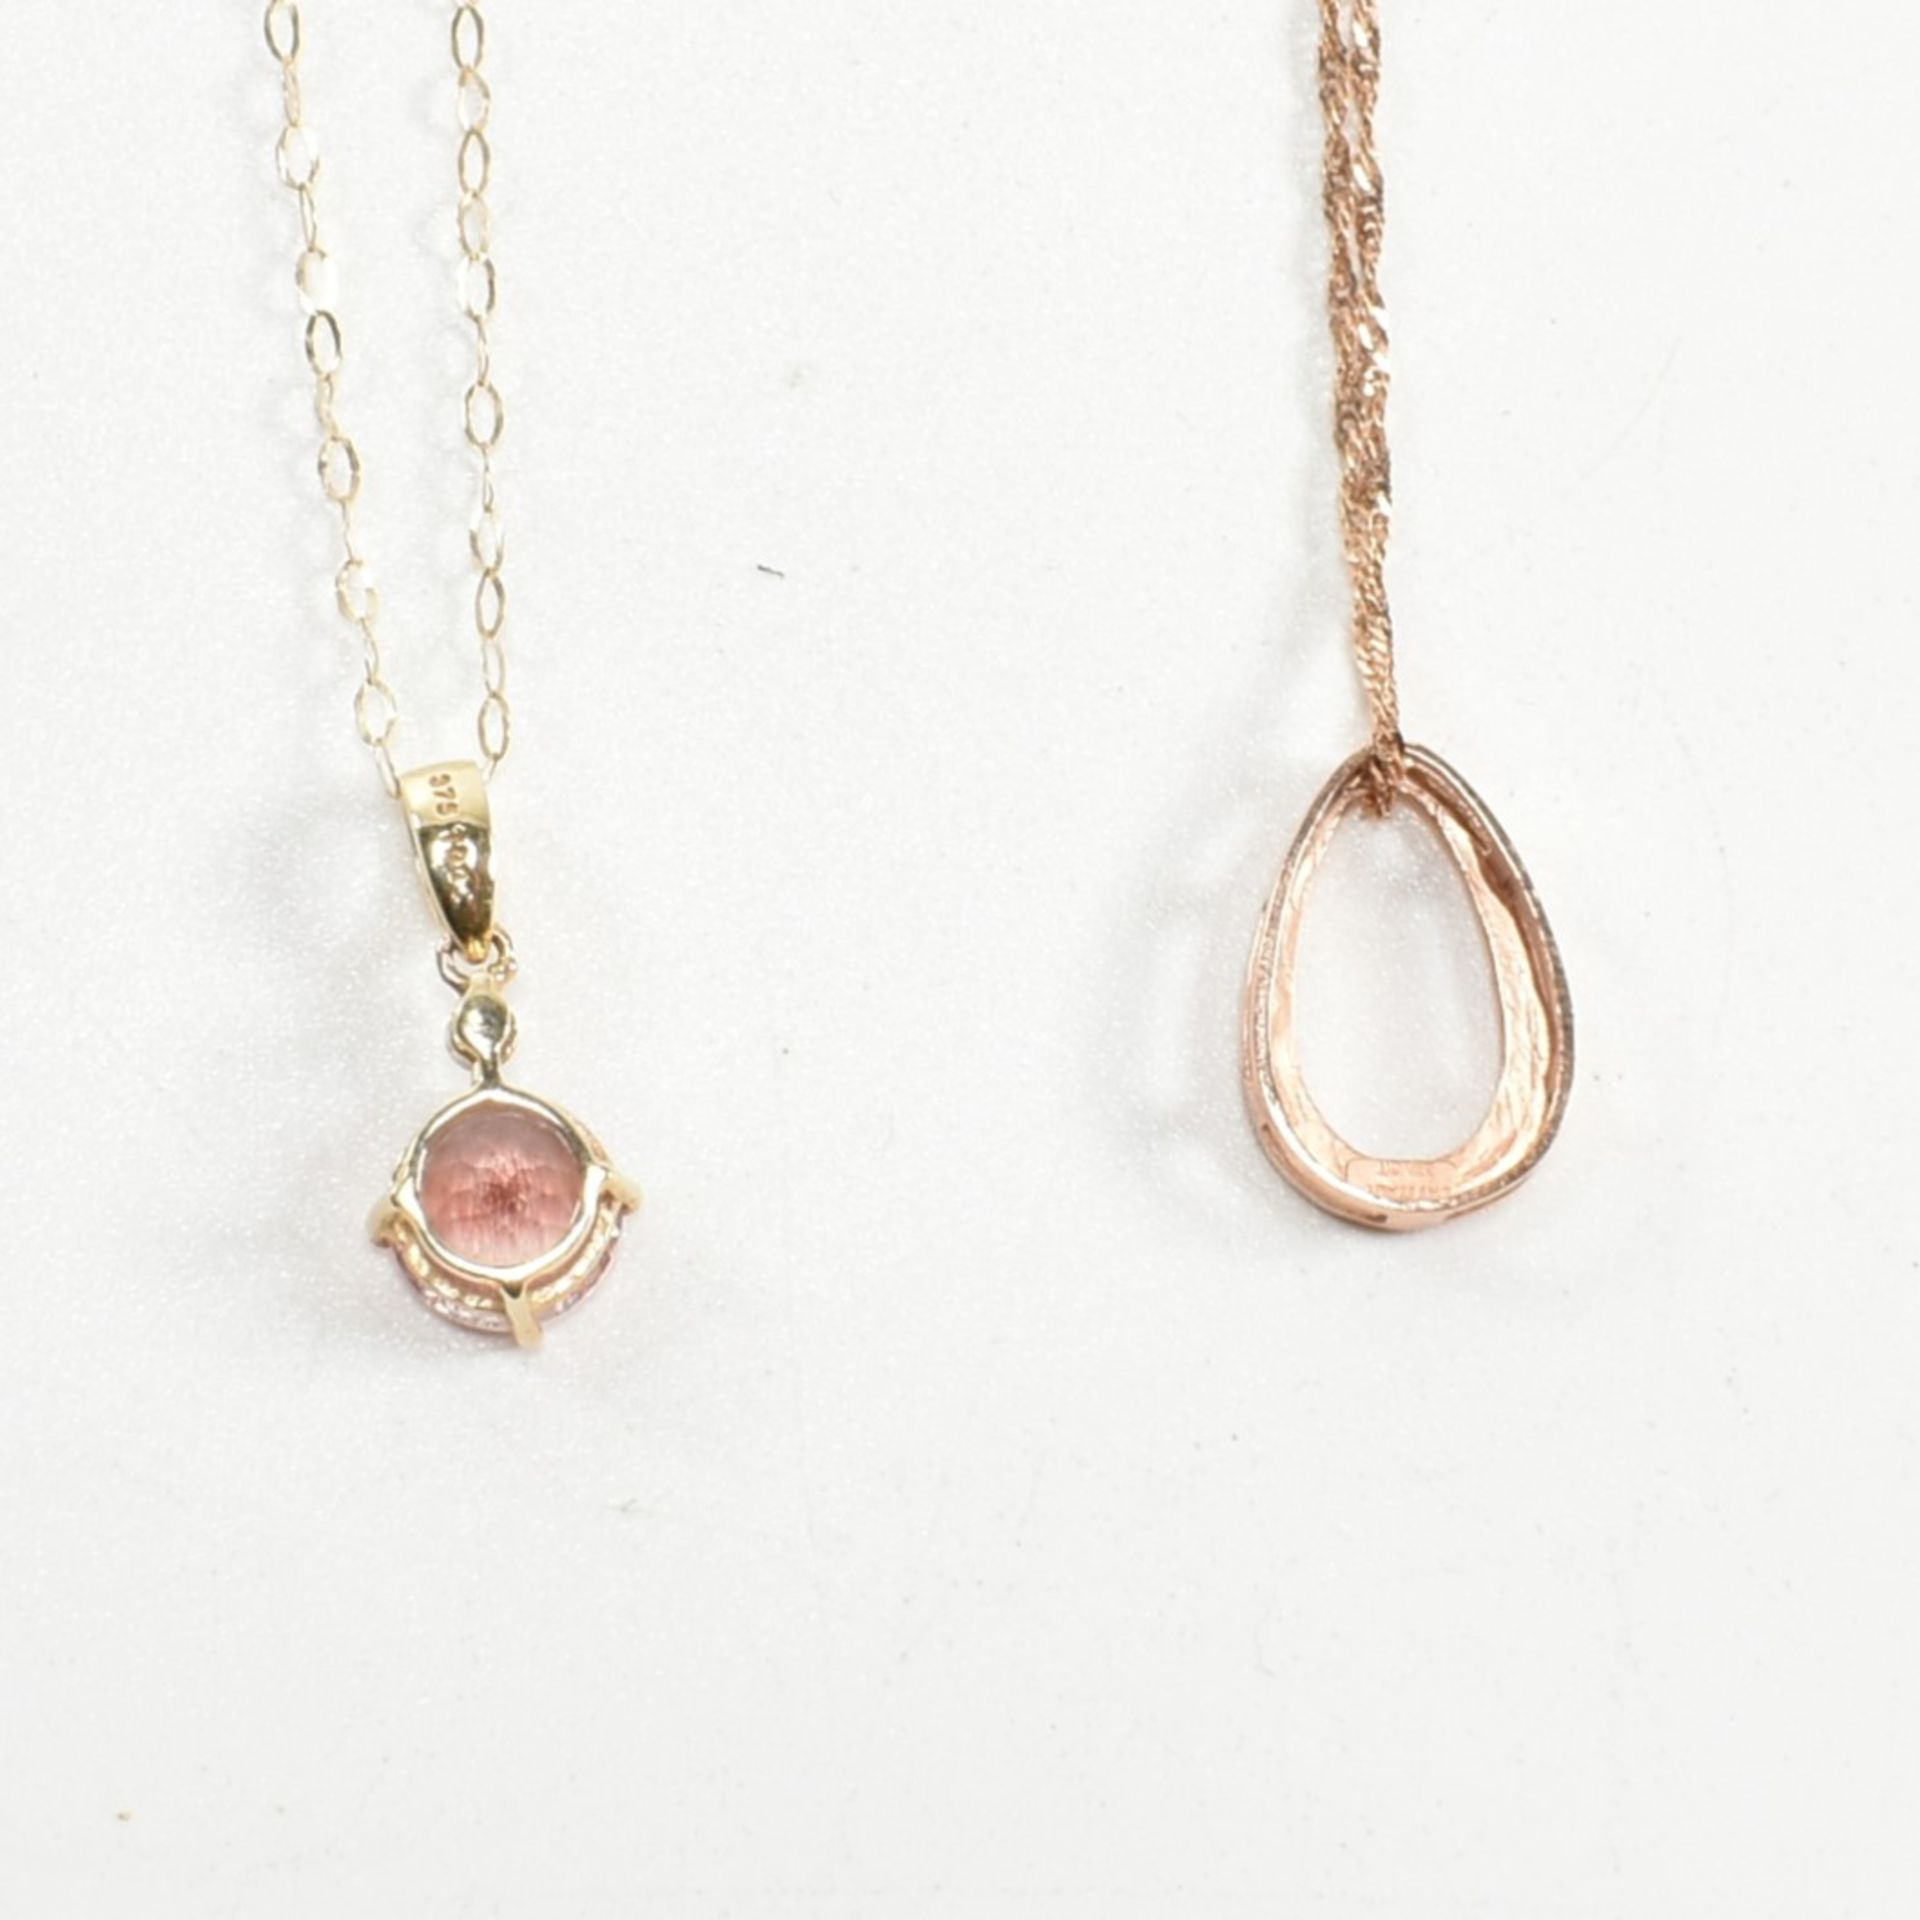 9CT ROSE GOLD PENDANT NECKLACE & 9CT YELLOW GOLD & GEM SET PENDANT NECKLACE - Image 4 of 6